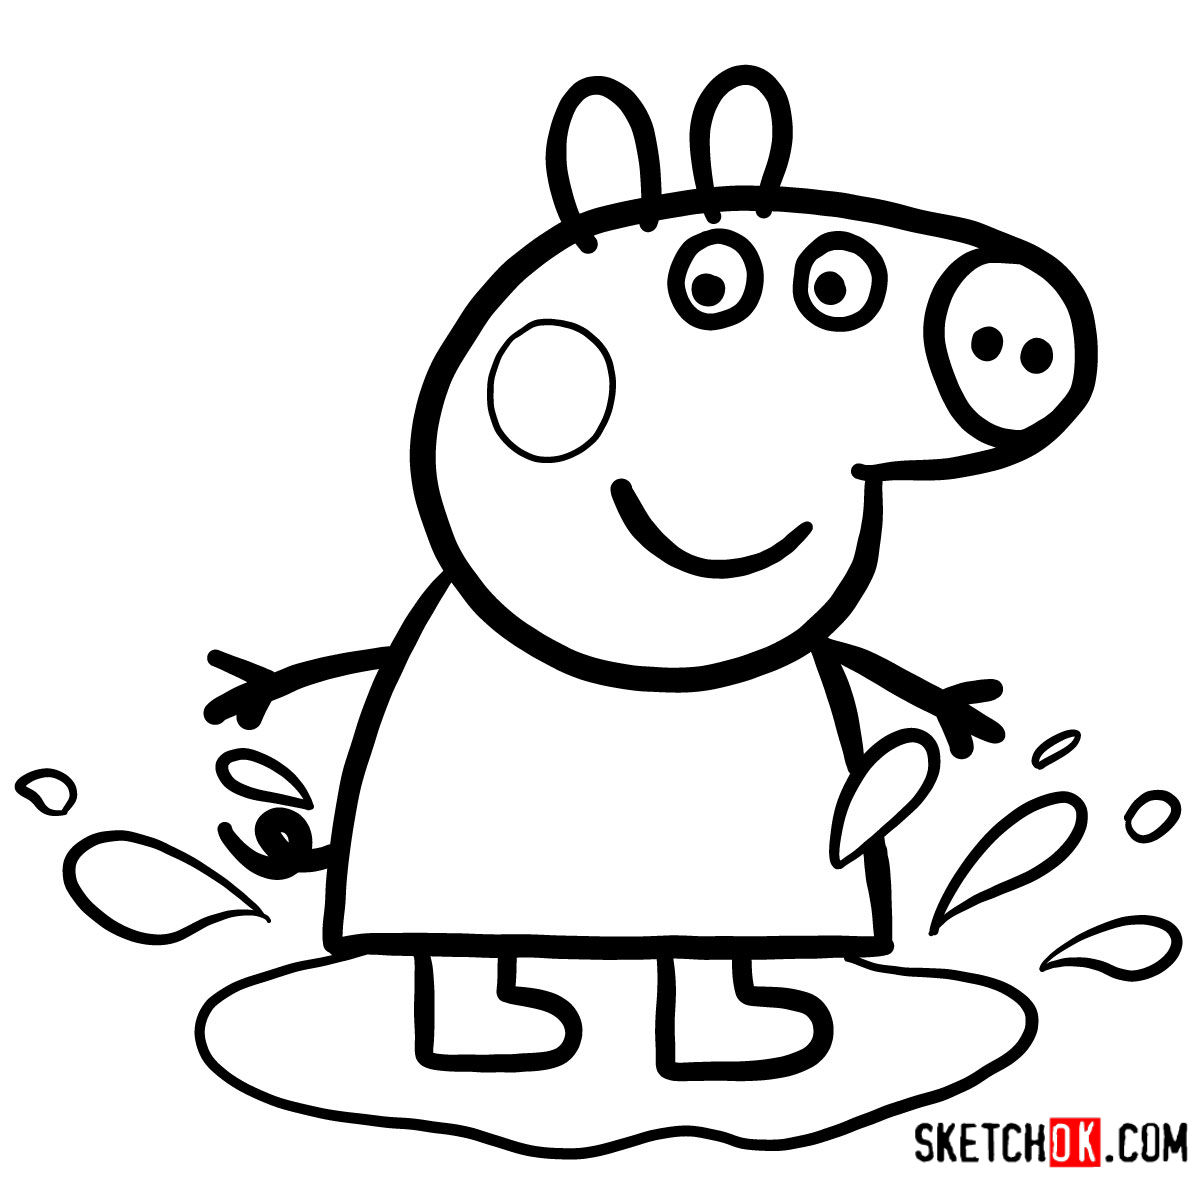 How to draw Peppa Pig in the mud puddle - Sketchok easy drawing guides